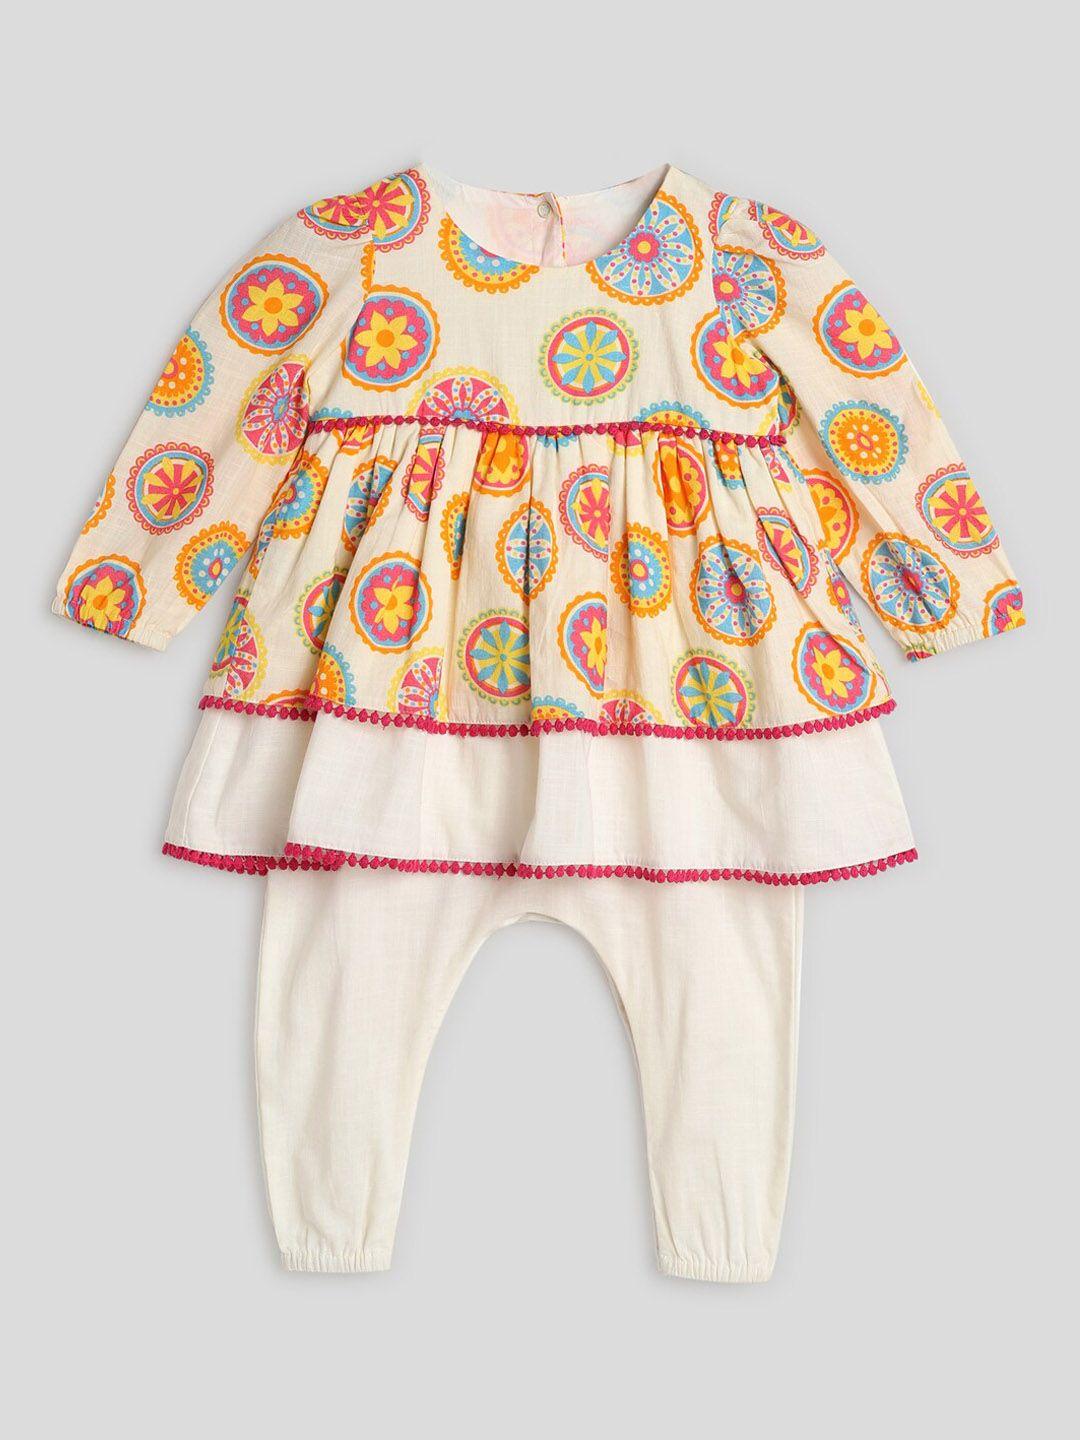 somersault-infant-girls-ethnic-motifs-printed-pure-cotton-rompers